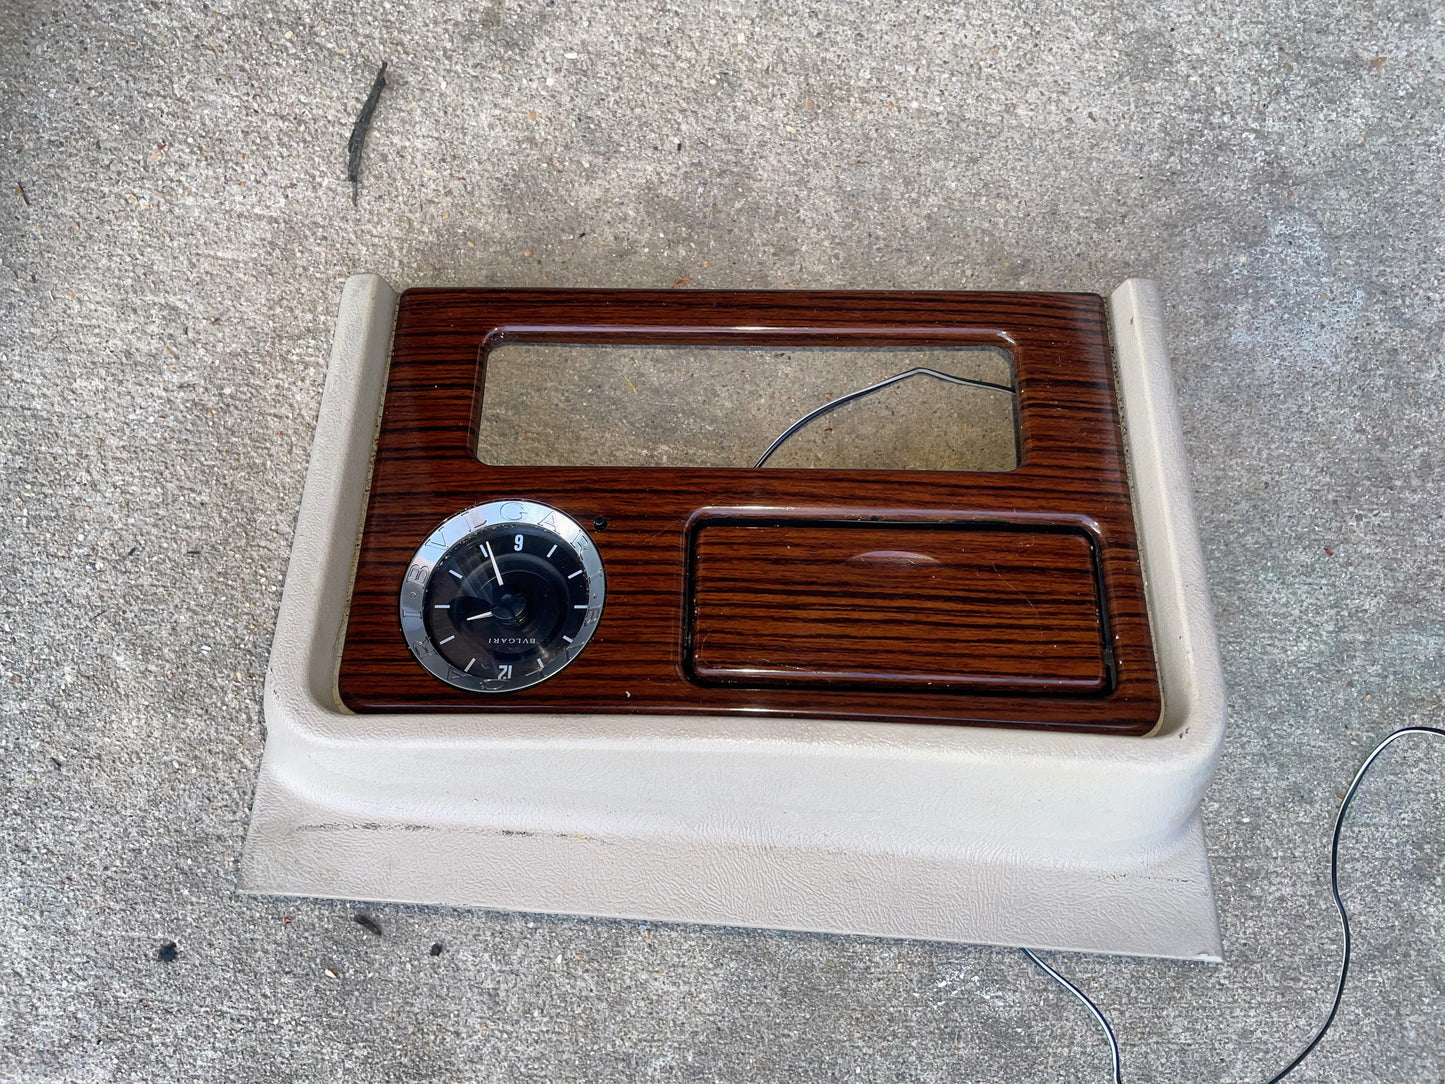 OEM Center Console Front Bin Woodgrain Trim with Clock in Light Beige for 2003-2006 Cadillac Escalade